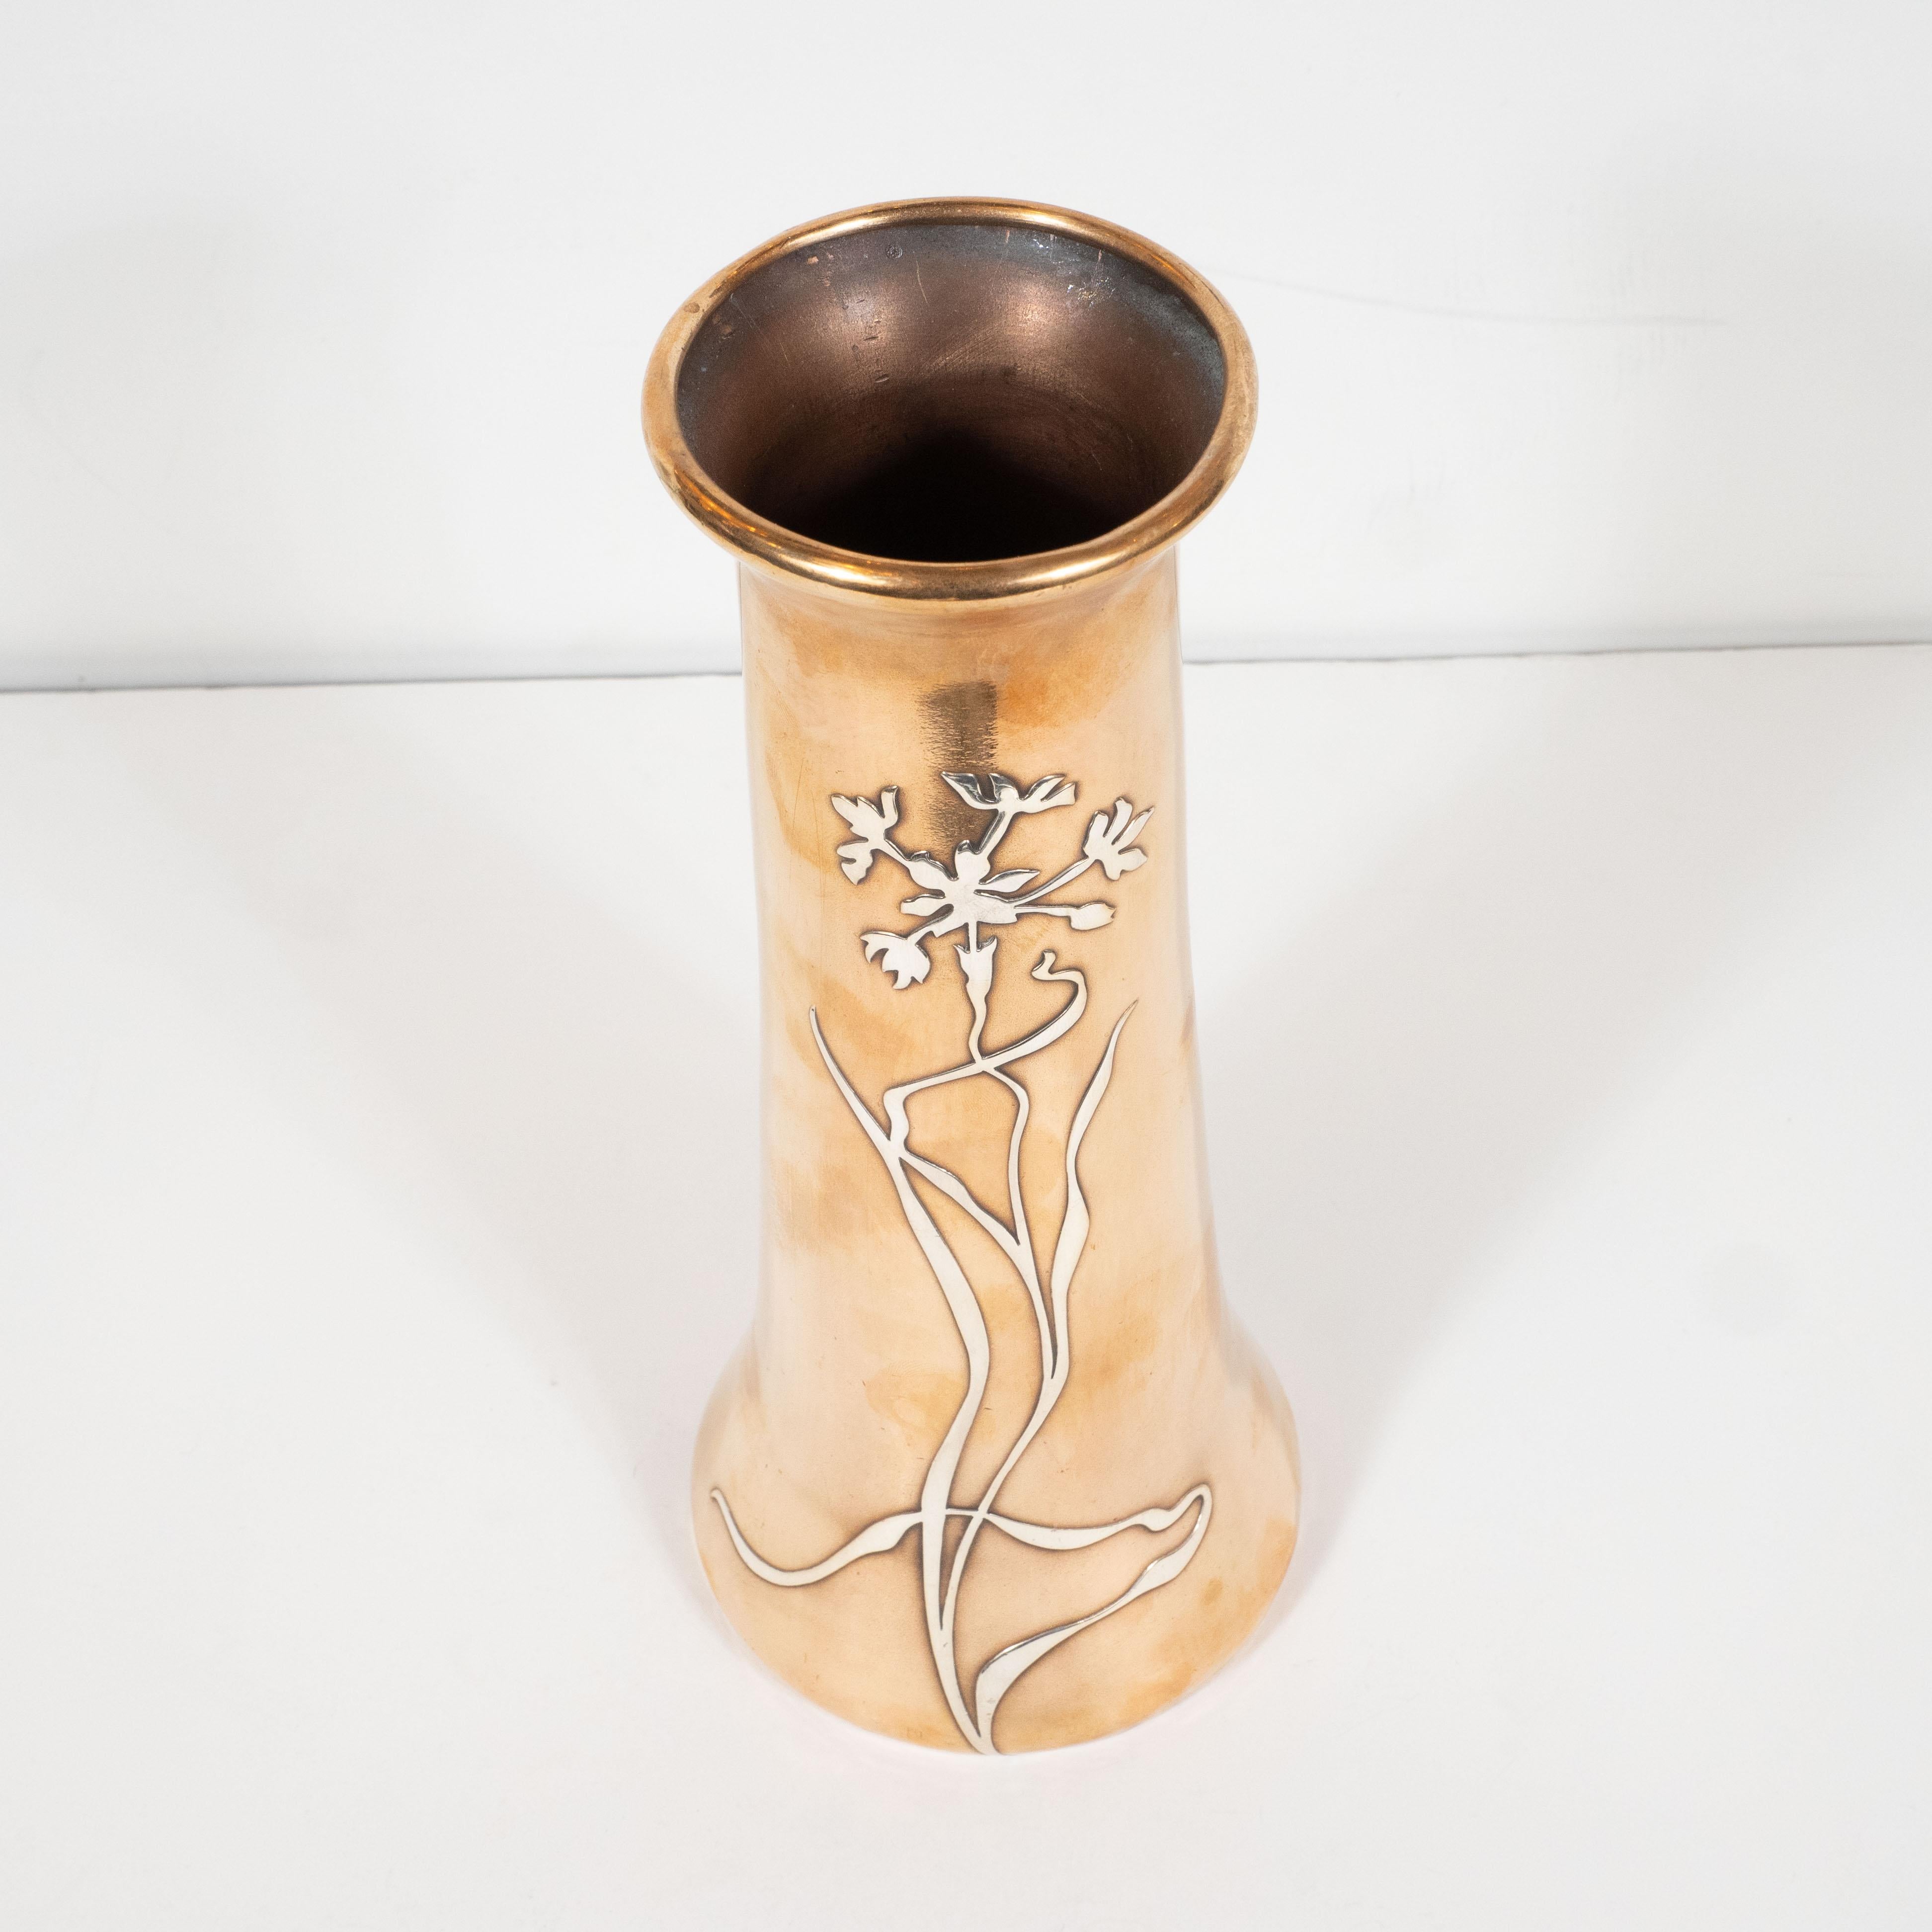 Early 20th Century Art Nouveau Bronze and Sterling Silver Overlay Vase by Otto Heintz